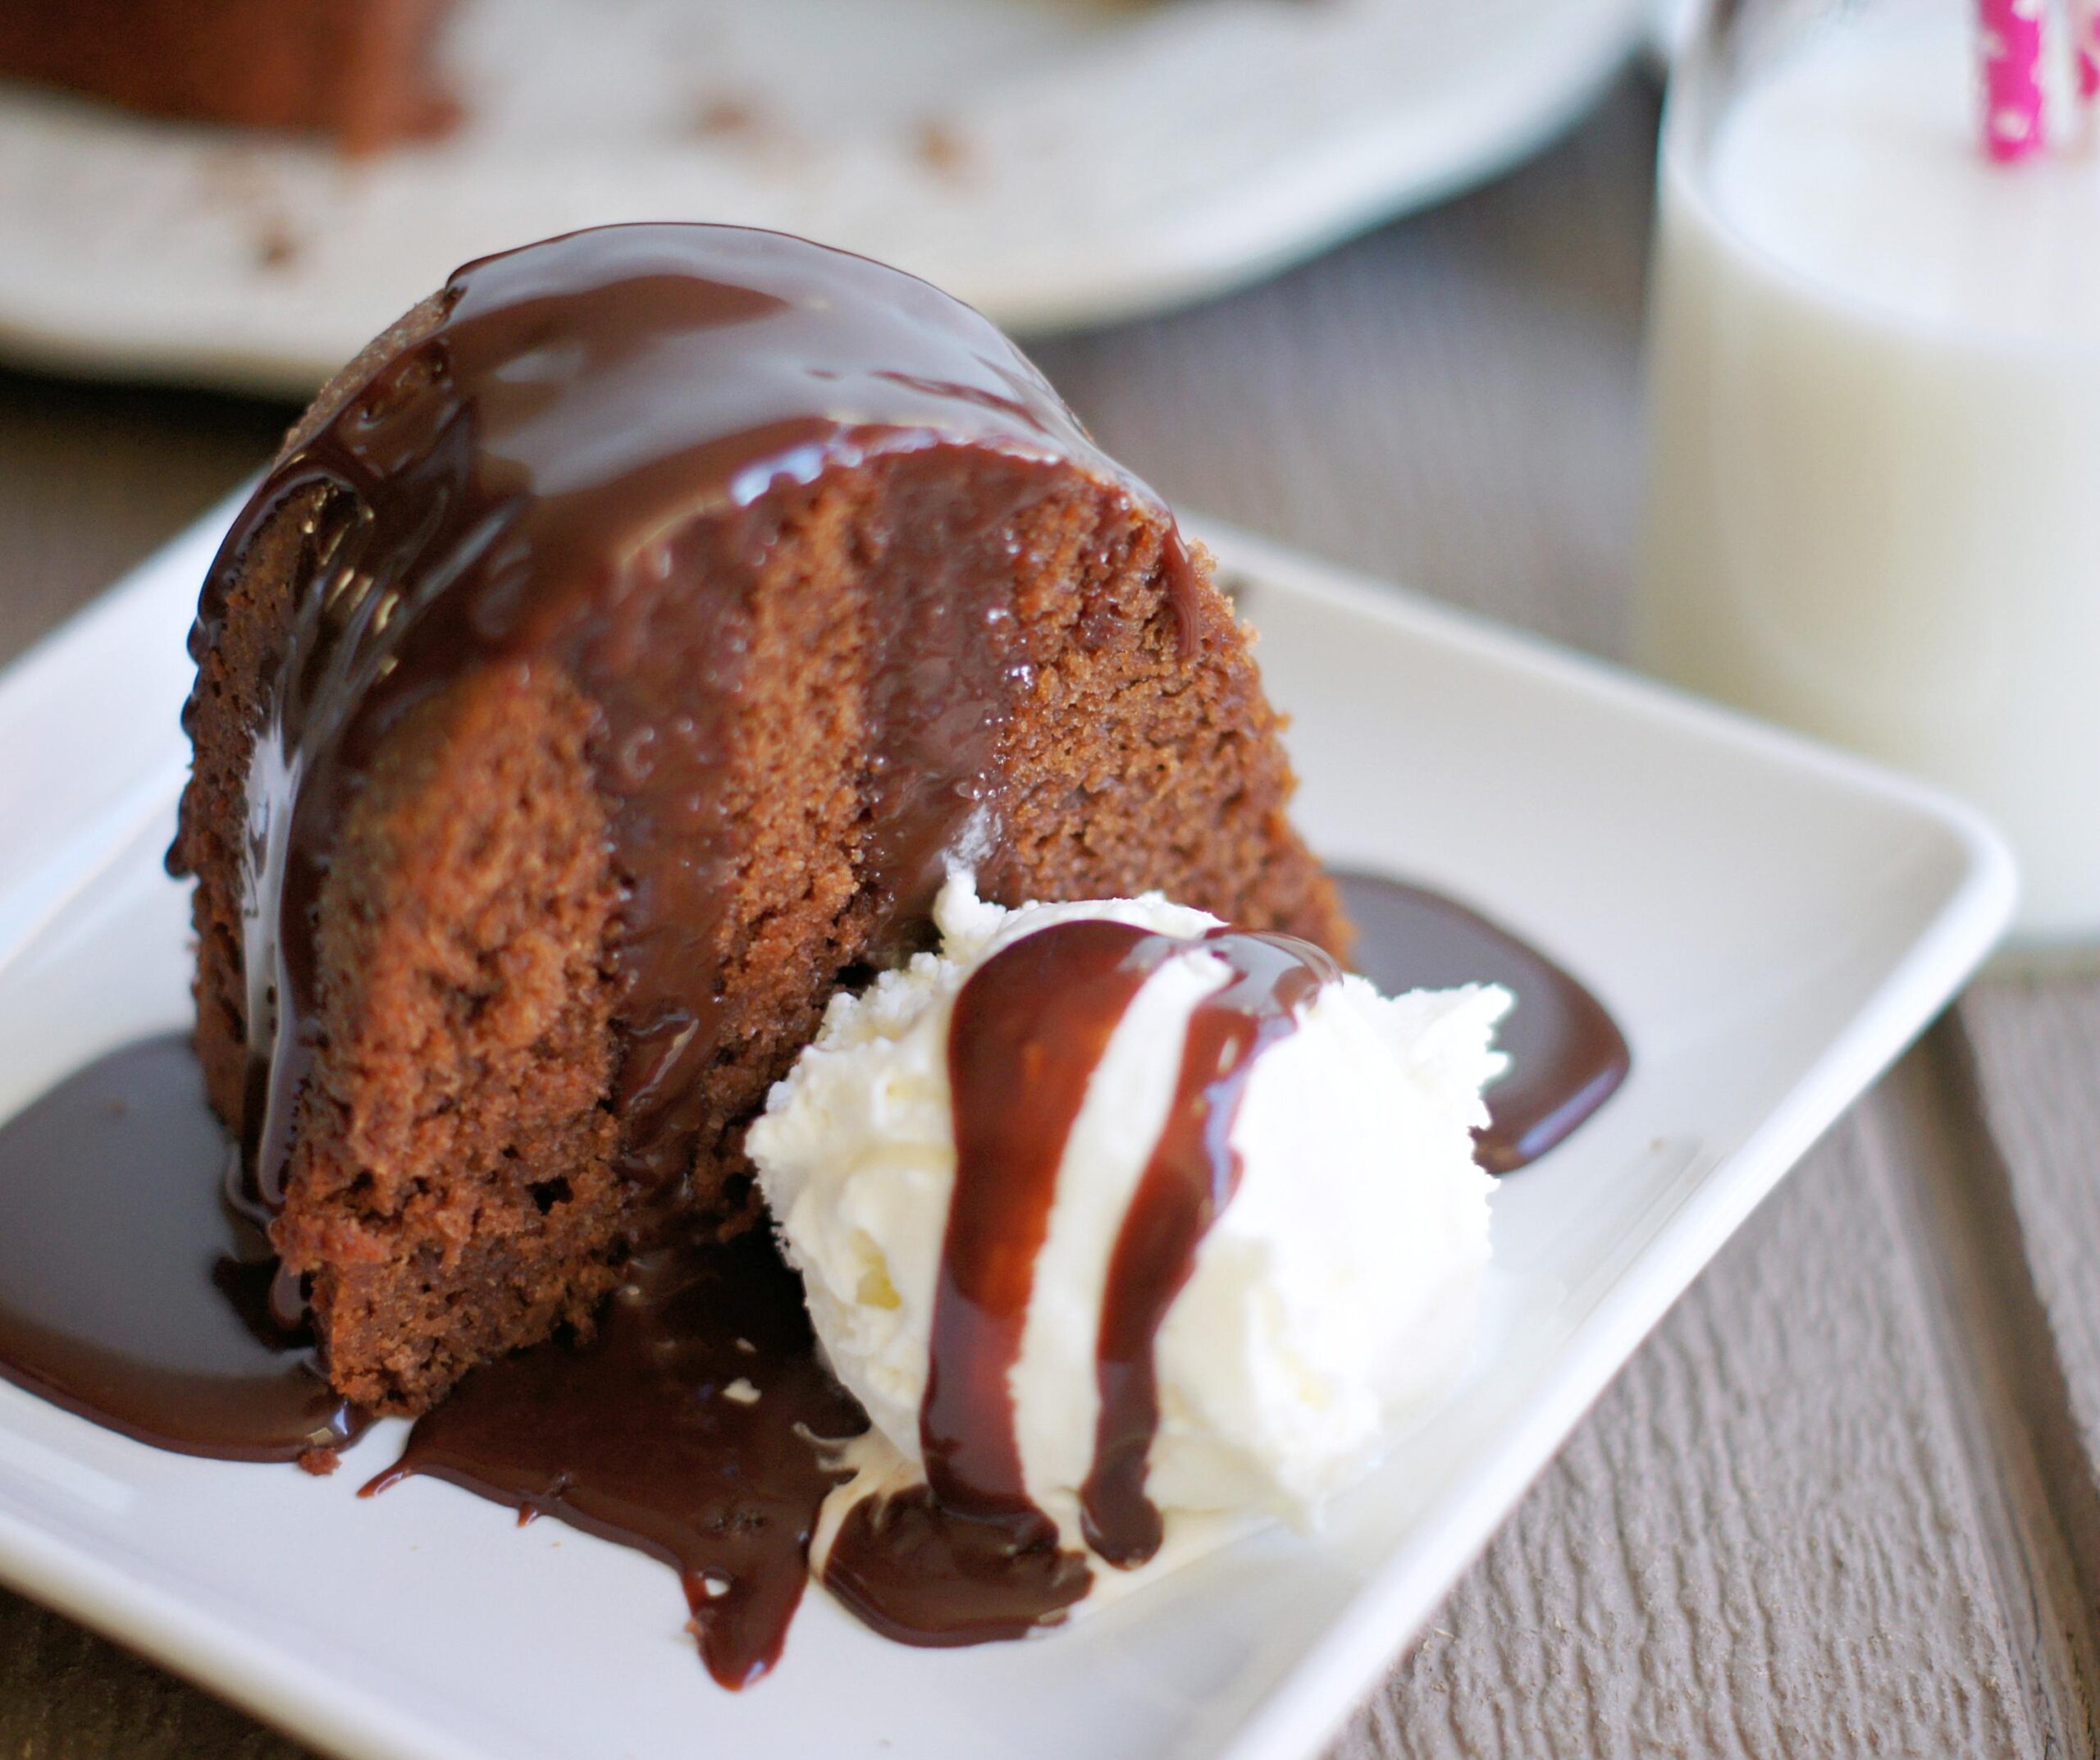  Indulge in a heavenly dessert with this hot chocolate sauce and pound cake combo!